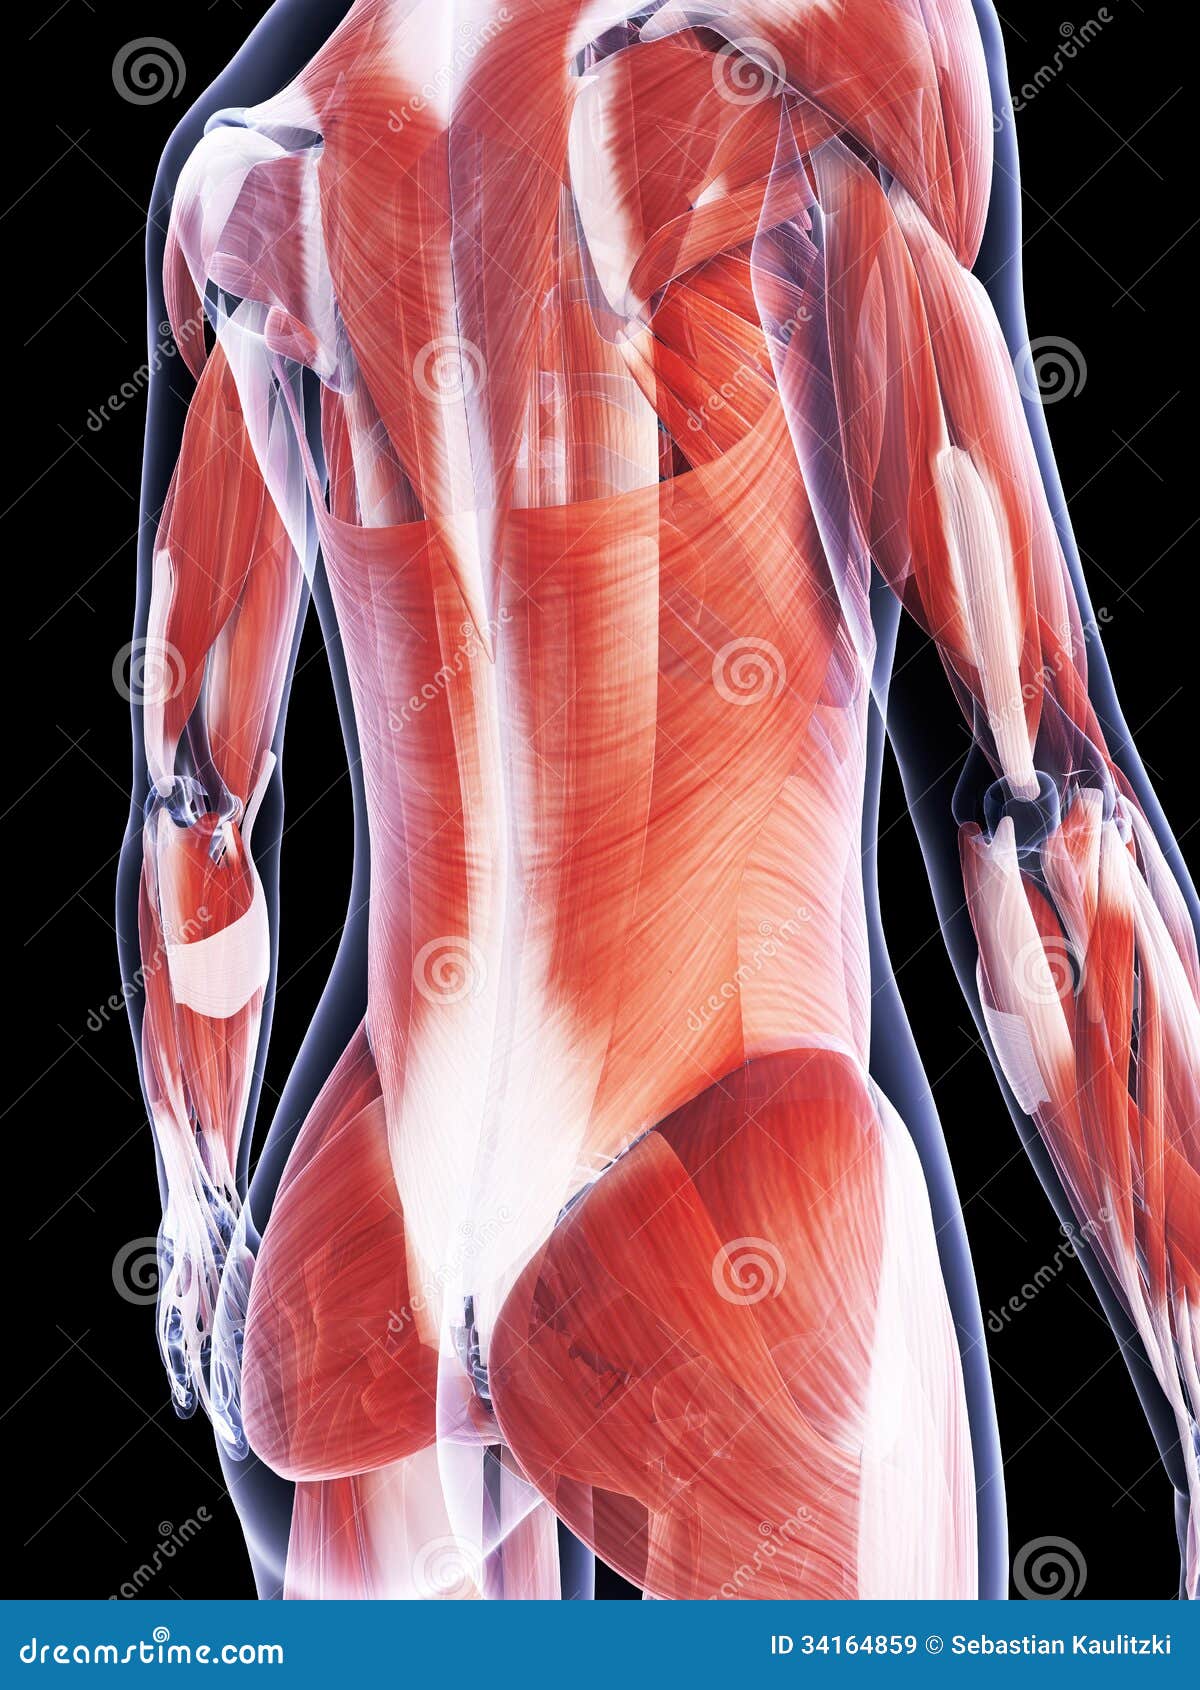 The Muscle System Royalty Free Stock Images - Image: 34164859